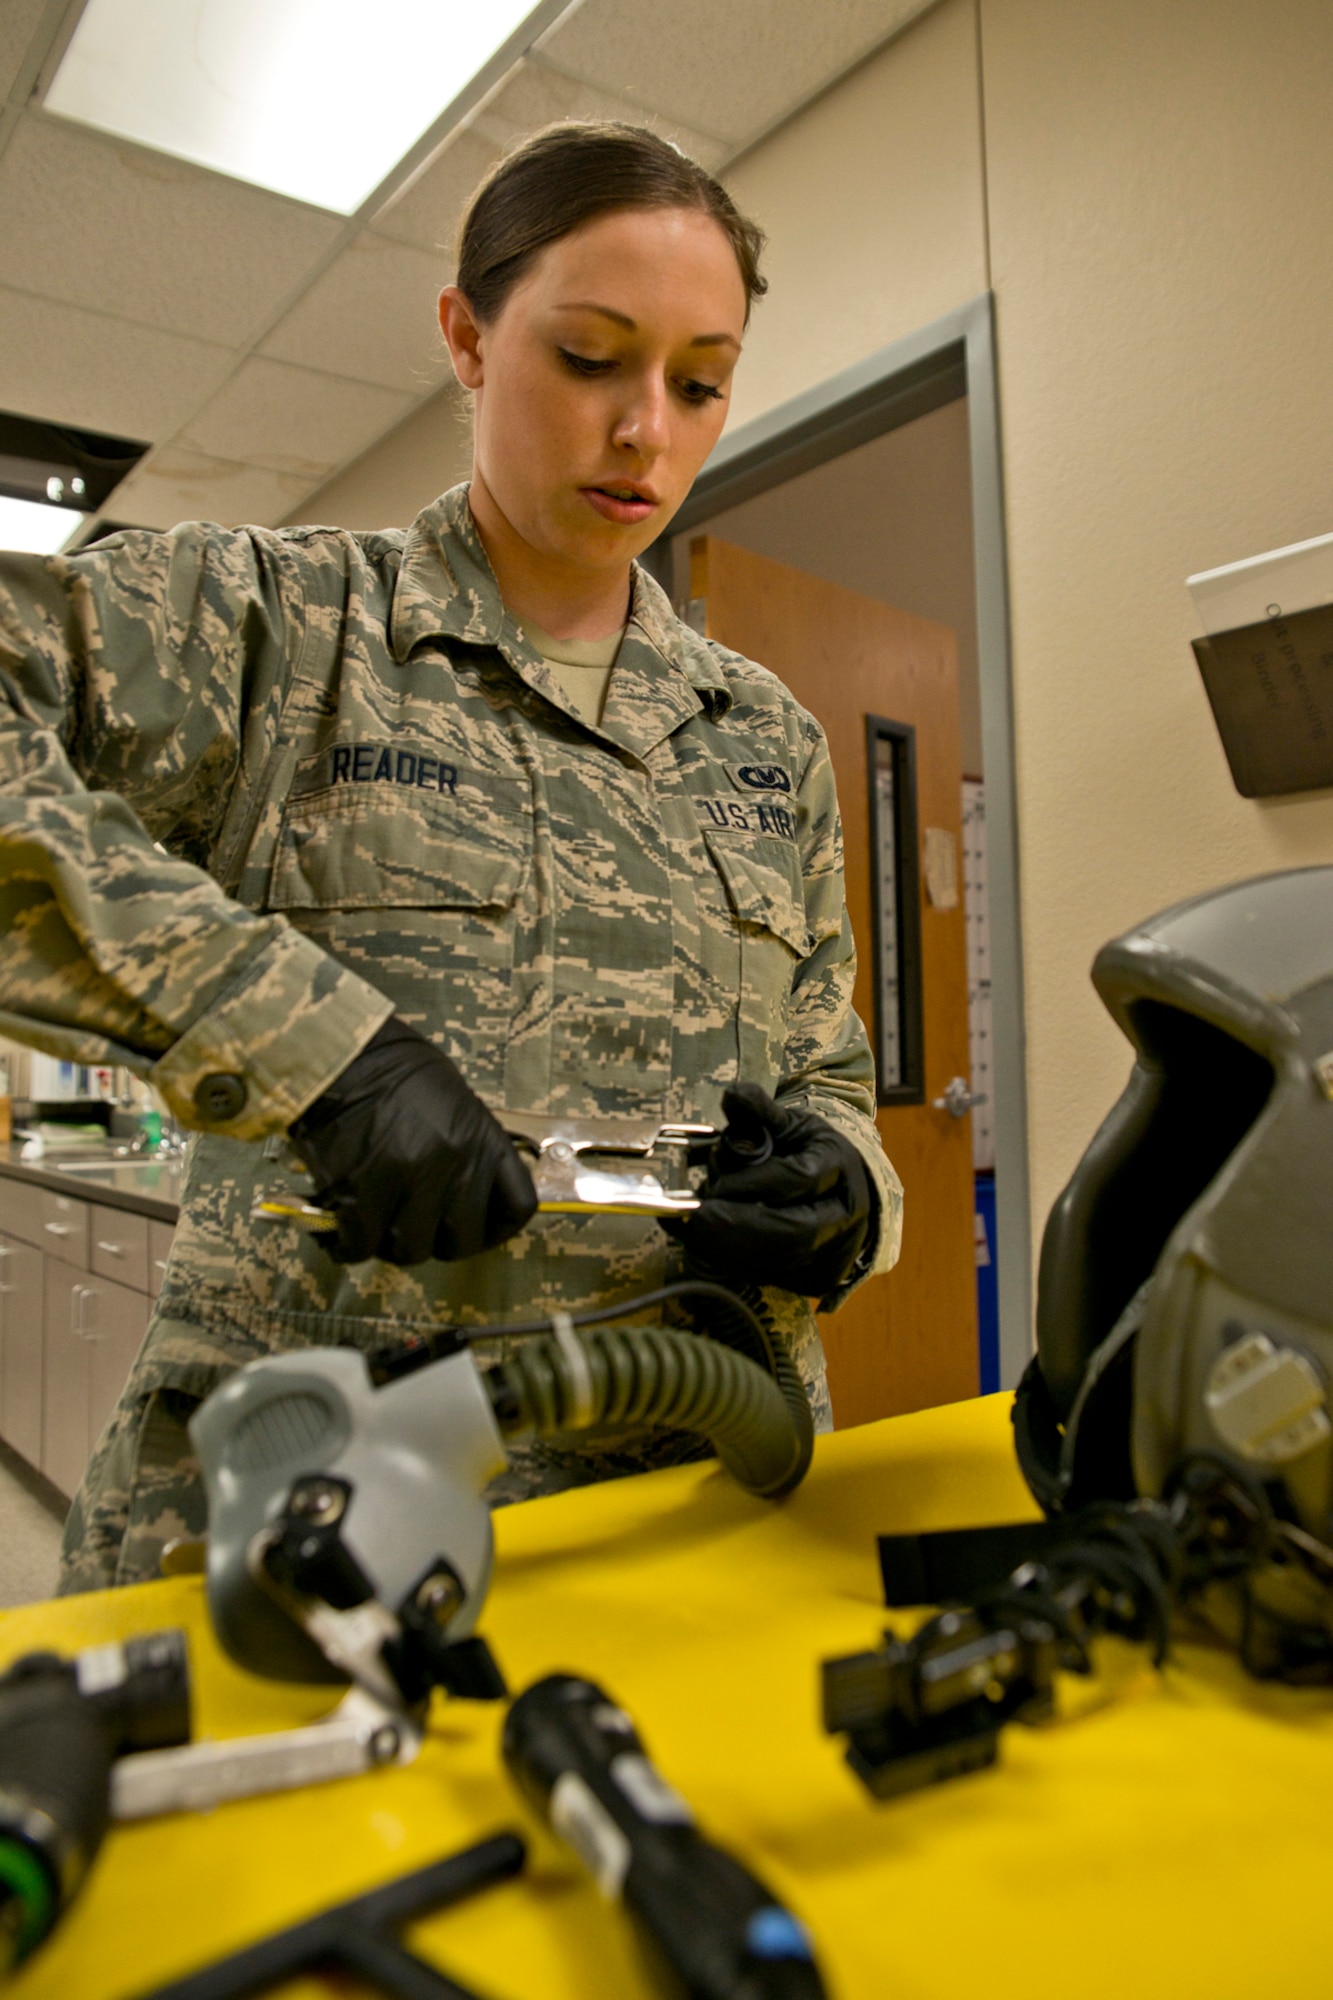 U.S. Air Force Reserve Senior Airman Bobbi Reader, an aircrew flight equipment (AFE) technician assigned to the 913th Operations Support Squadron, inspects an MBU-12/P Oxygen Mask at Little Rock Air Force Base, Ark., Mar. 13, 2016. AFE specialists are responsible for packing emergency items like parachutes and survival kits and maintaining regularly used items like flight helmets and oxygen masks. They ensure all flight and safety equipment is in perfect working order and that aircrews have the supplies necessary for any situation. (U.S. Air Force photo by Master Sgt. Jeff Walston/Released)